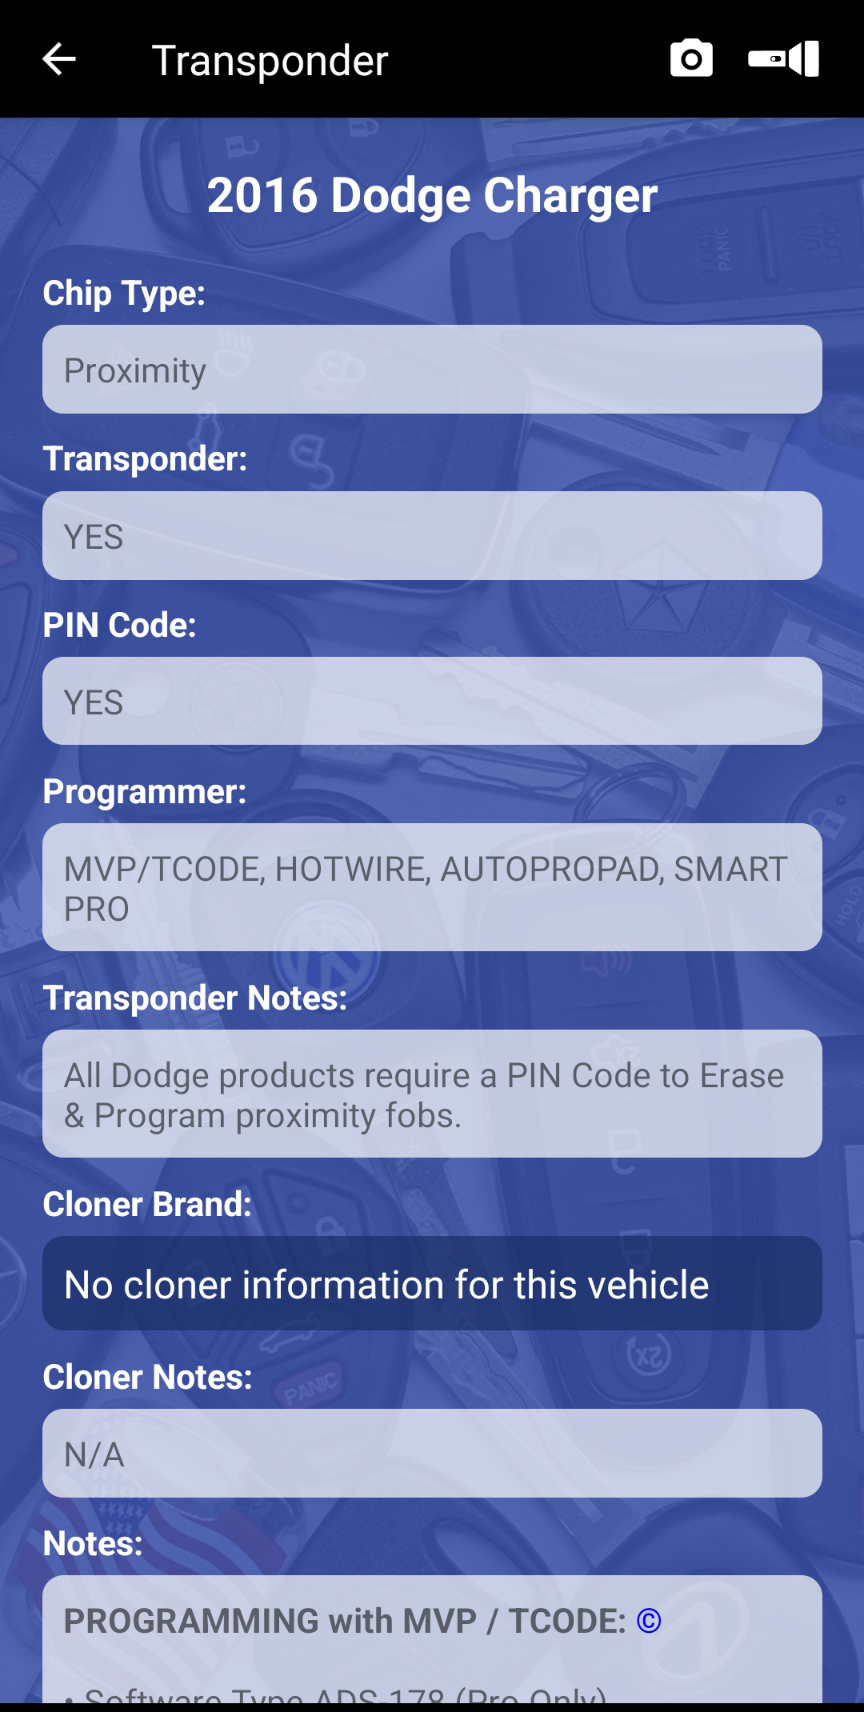 TWO Pack of MyAutoSmart Mobile for the iPhone, iPad or Android Smartphone or Tablet - New User or Renewal - AutoSmart Advisor